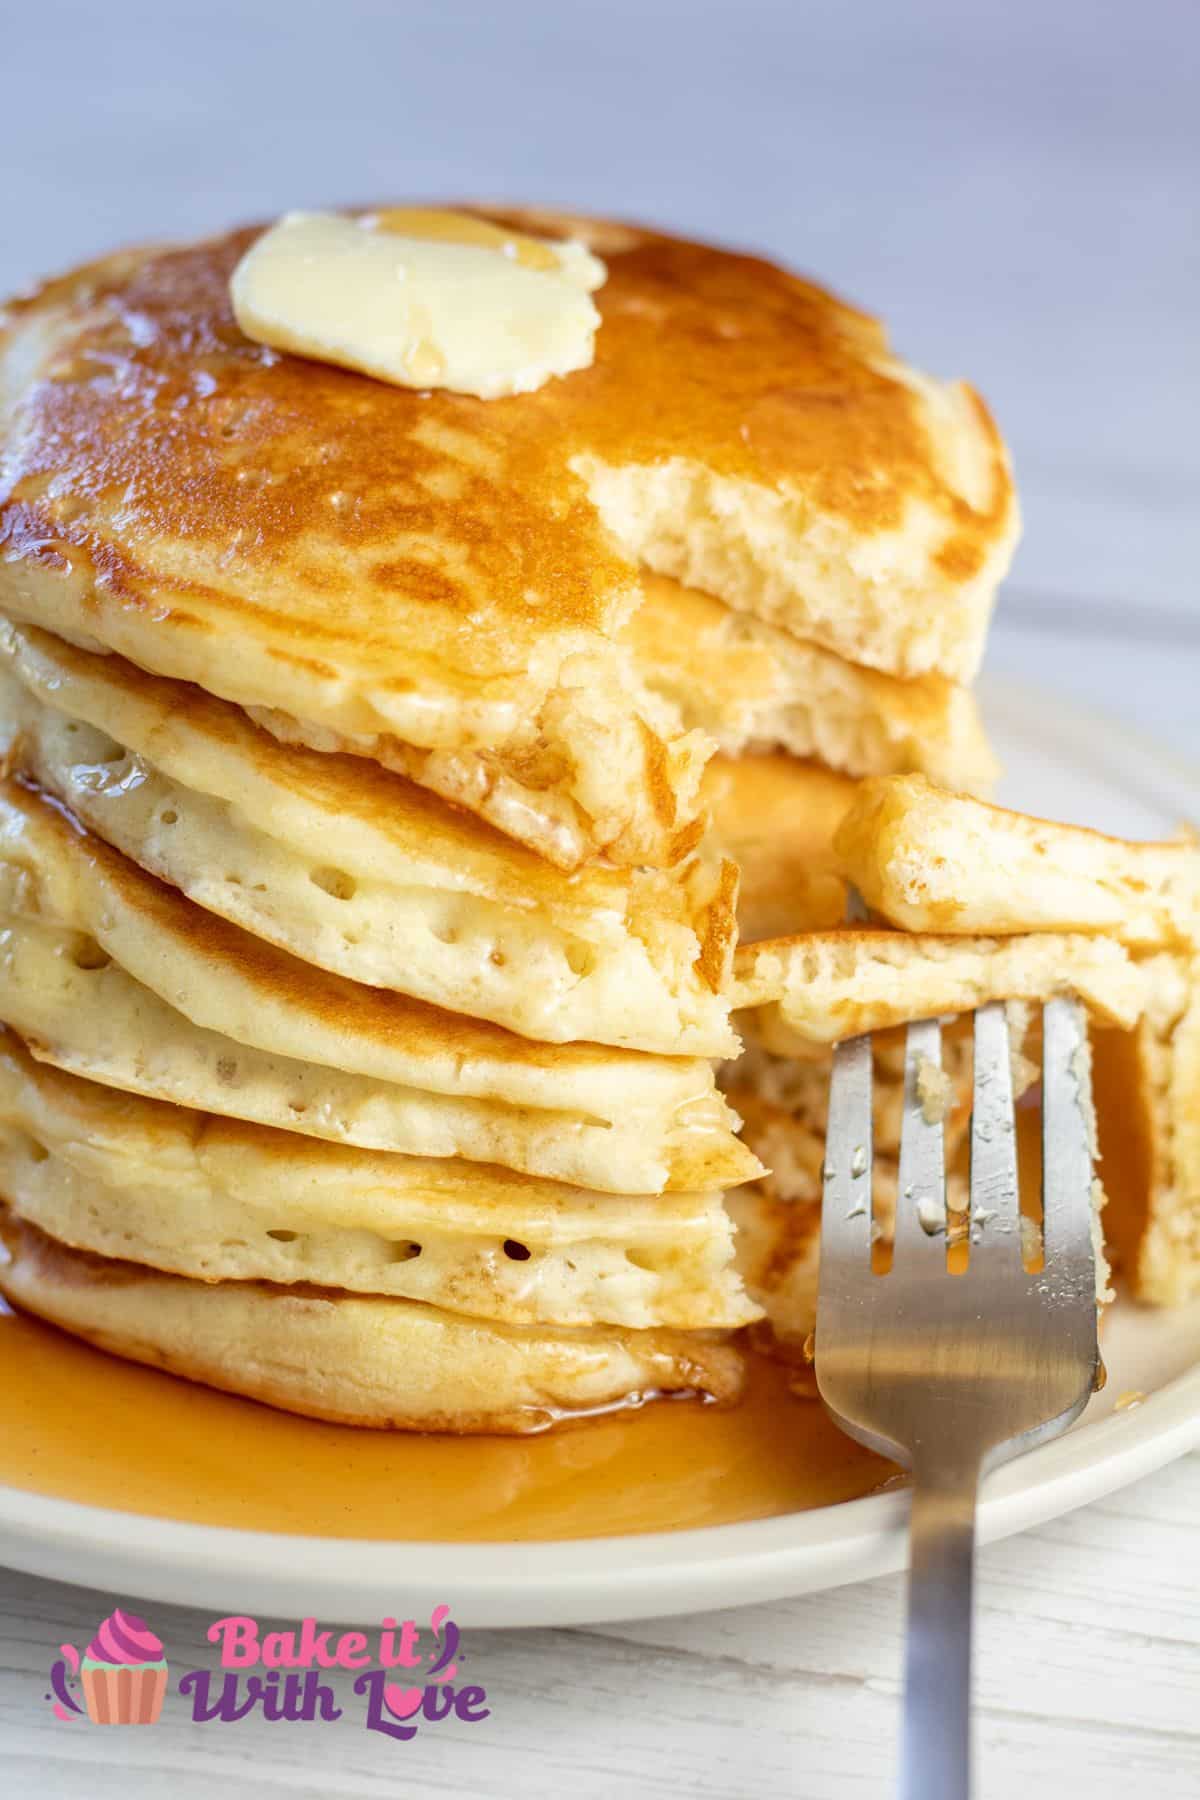 Tall stack of buttermilk pancakes with syrup and a bite cut through the stack.